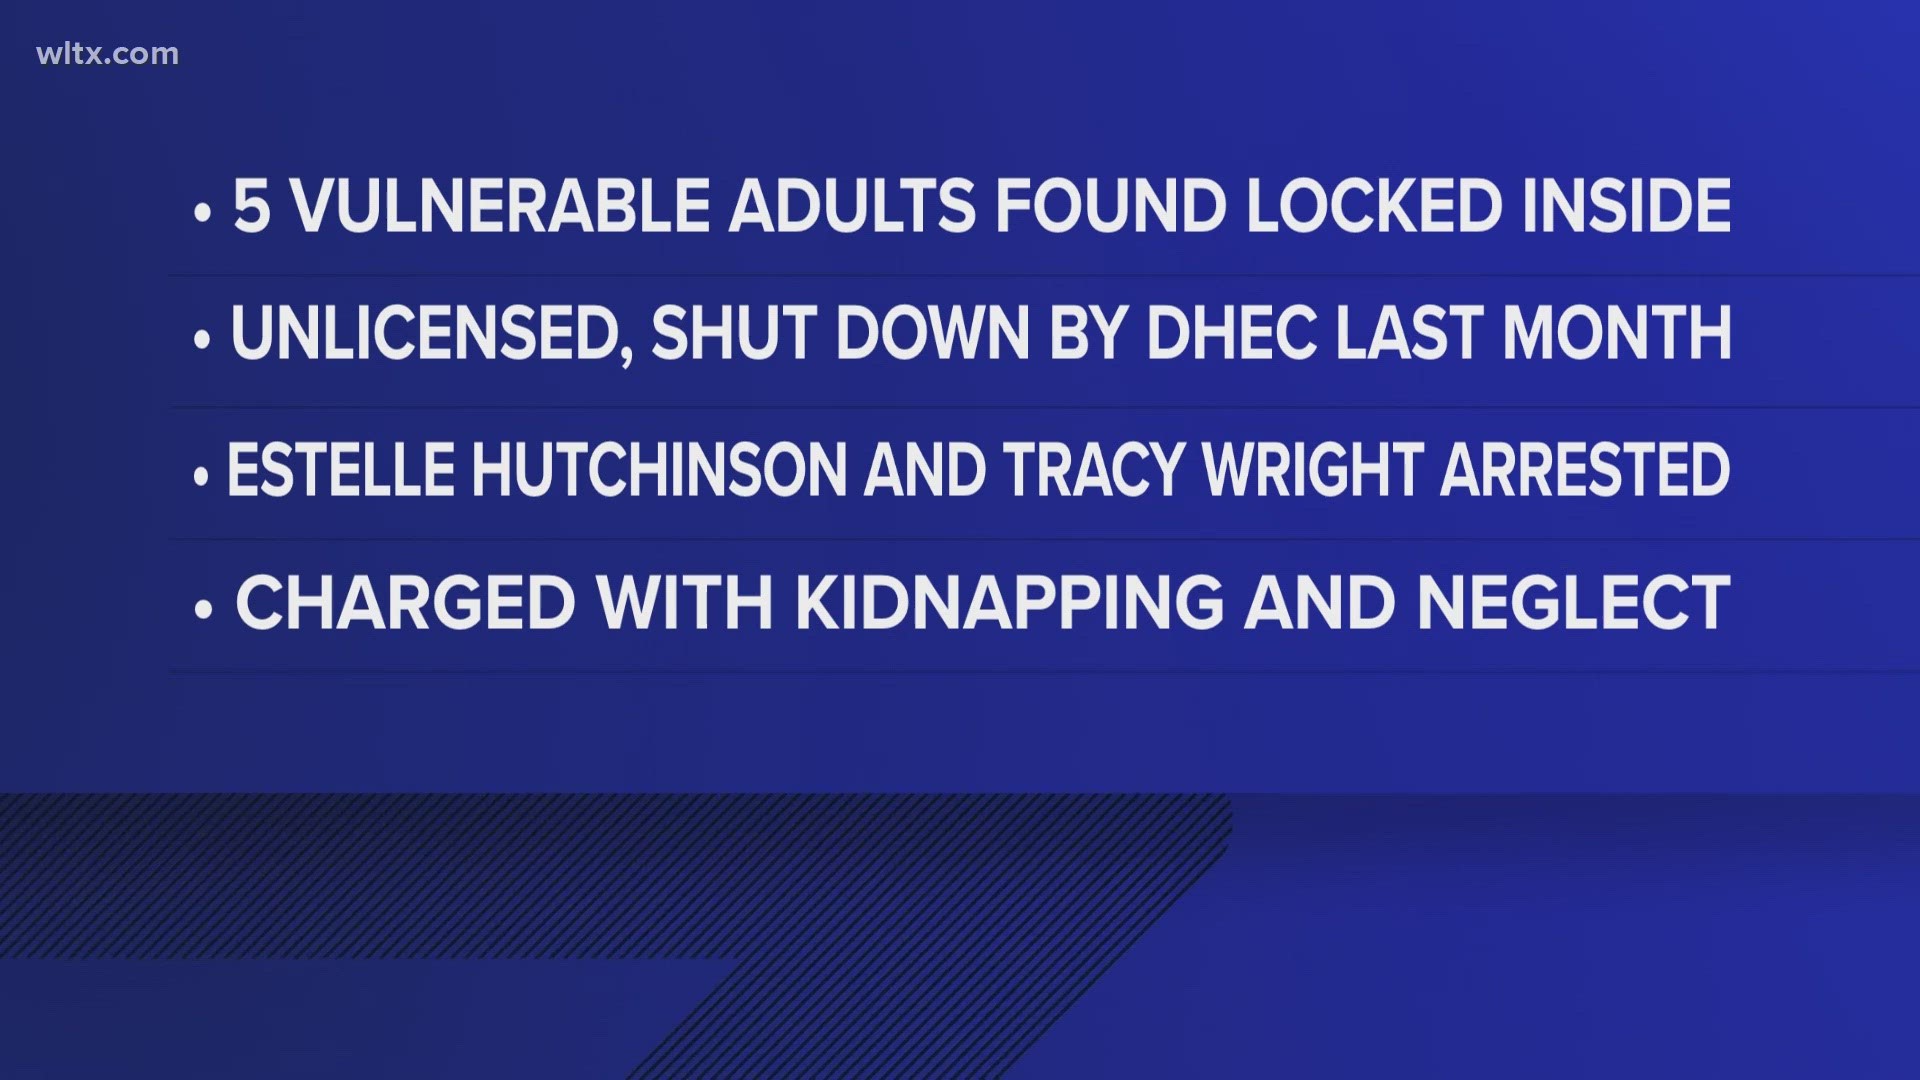 Two people in Orangeburg have been arrested and charged with kidnapping and neglect of vulnerable adults after five people were found locked in a room.